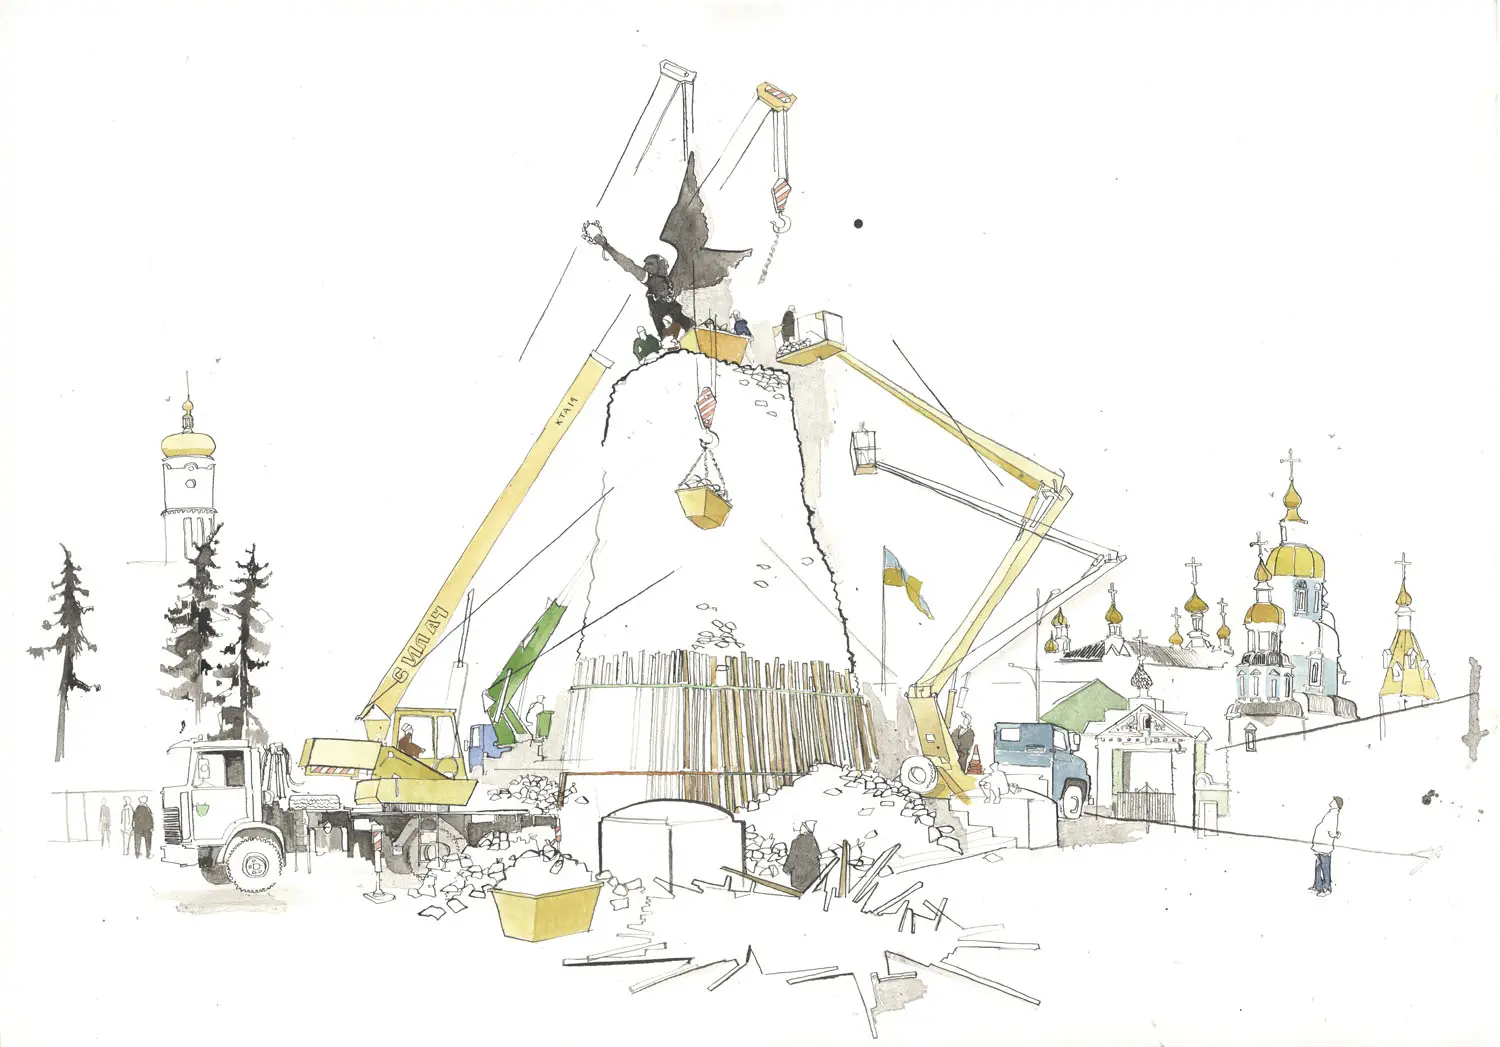 Illustration of a city square where crane trucks surround a tall statue. There are golden domes in the background. The cranes are lifting people and supplies meant to protect the statue. 